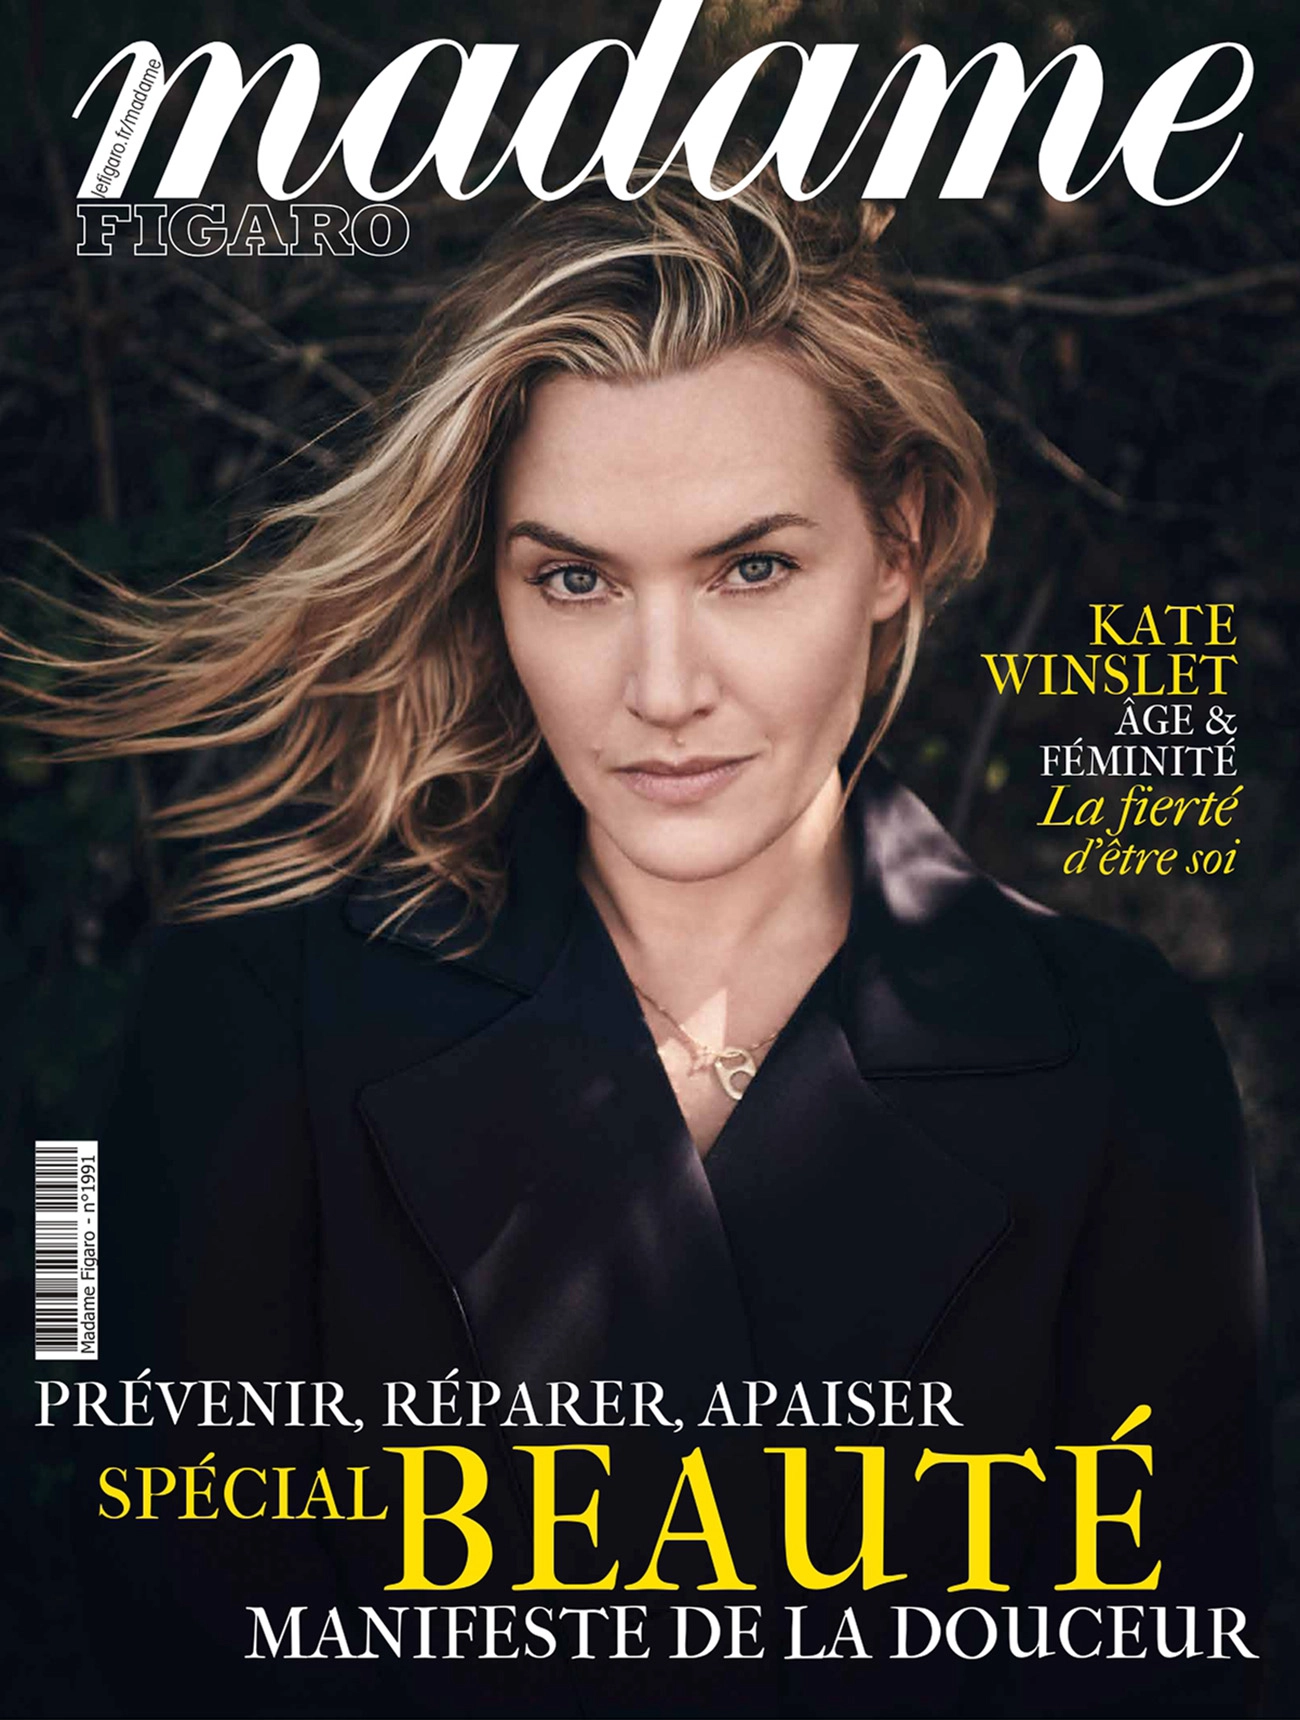 Kate Winslet covers Madame Figaro October 21st, 2022 by Jason Bell